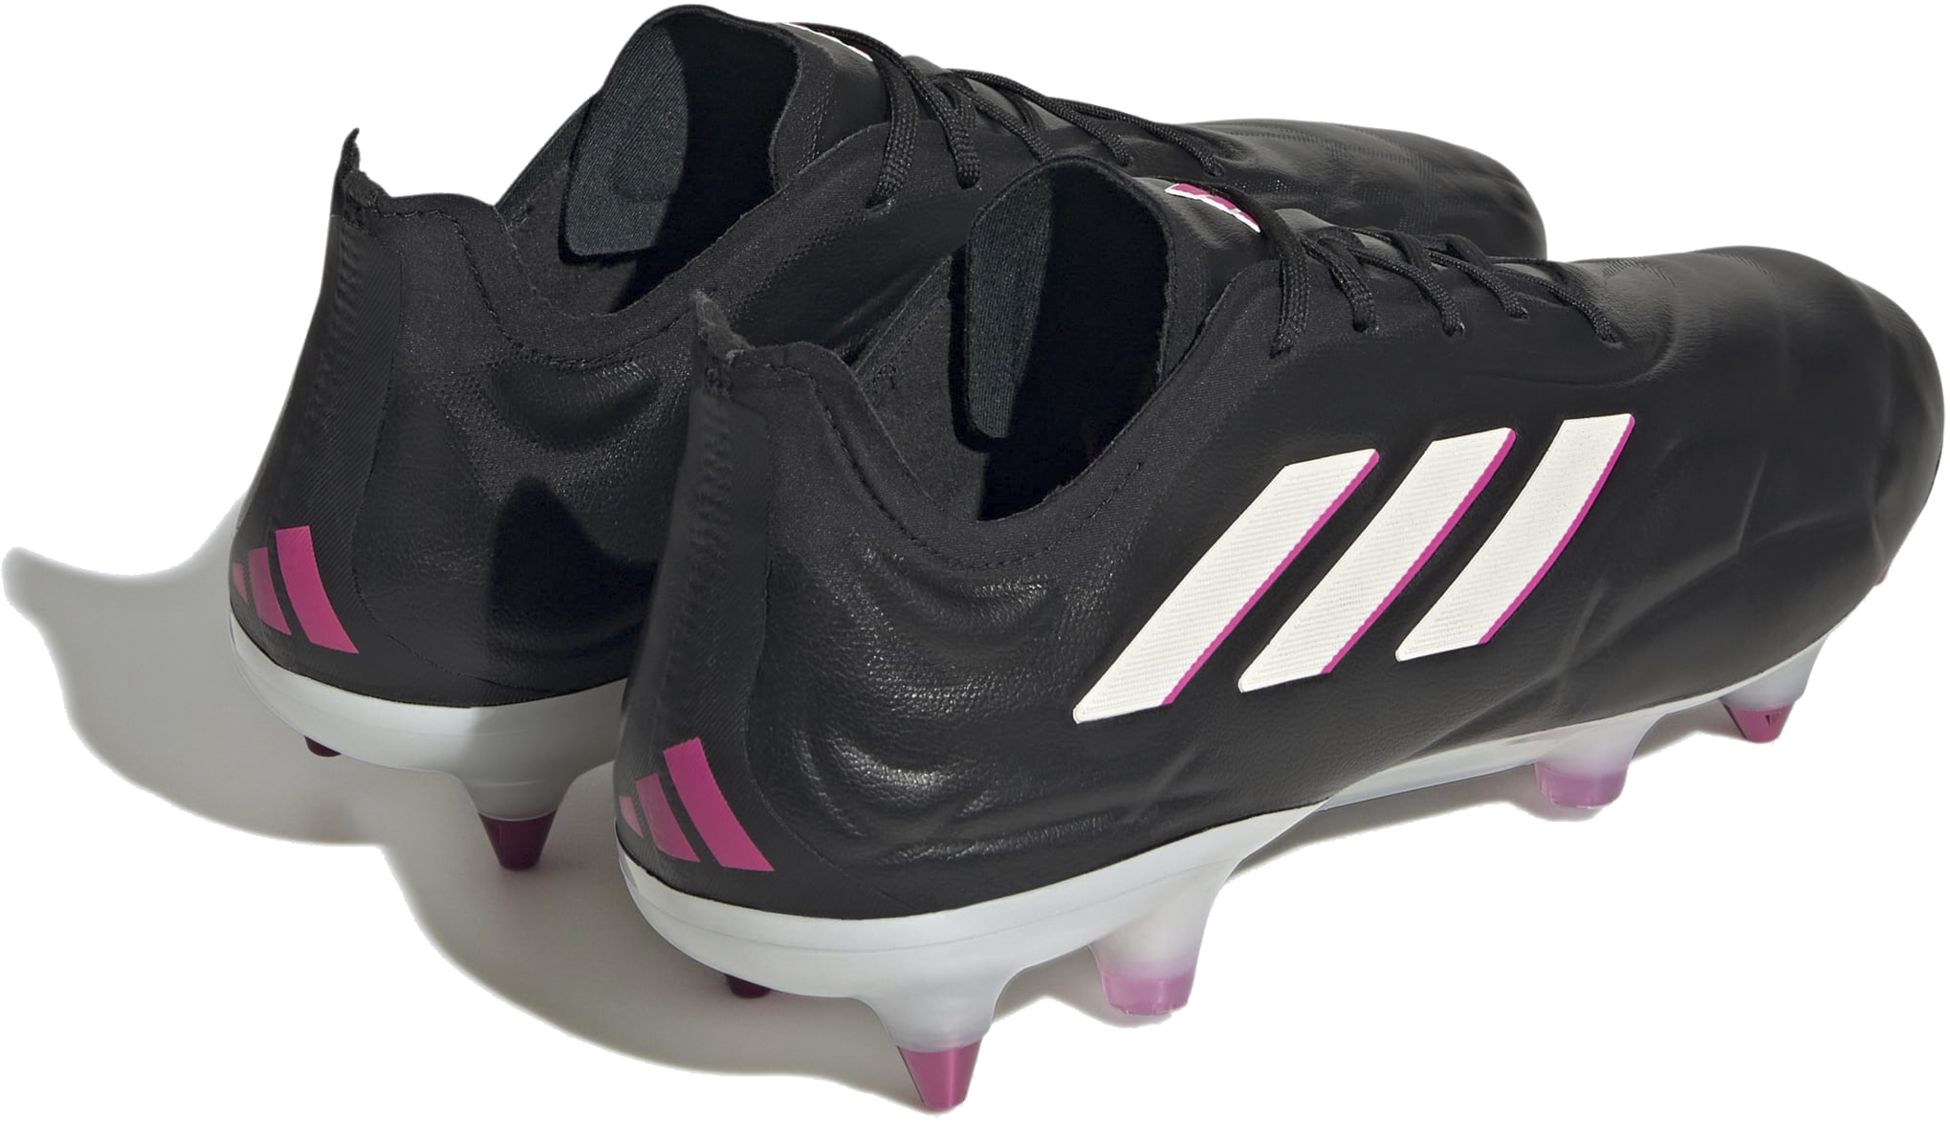 ADIDAS, Copa Pure.1 Soft Ground Boots